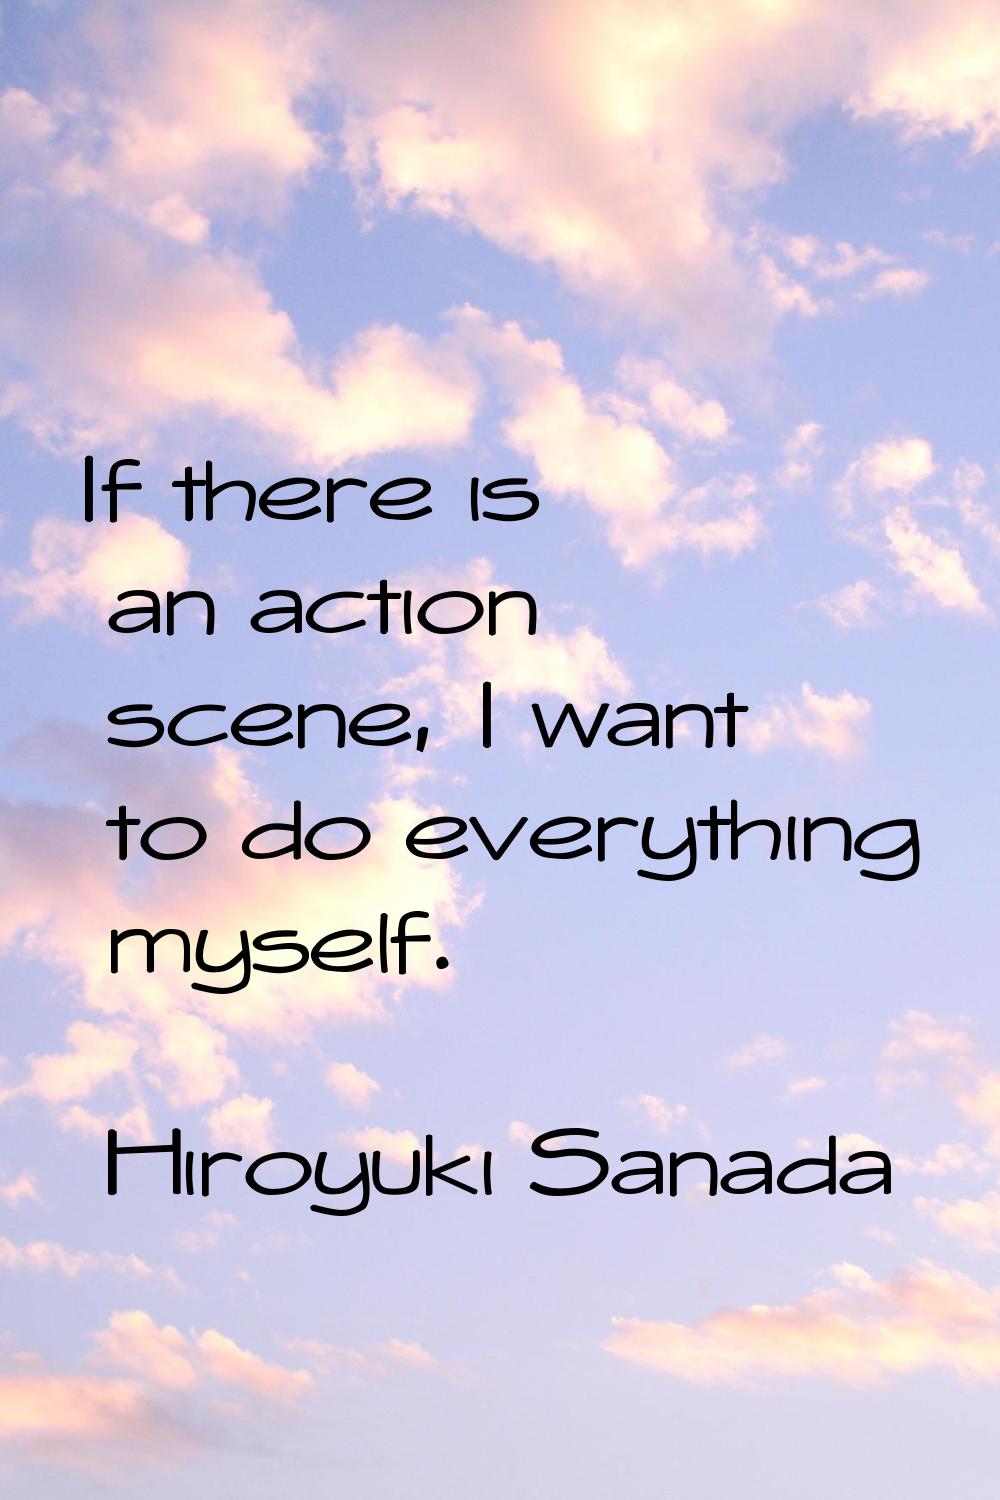 If there is an action scene, I want to do everything myself.